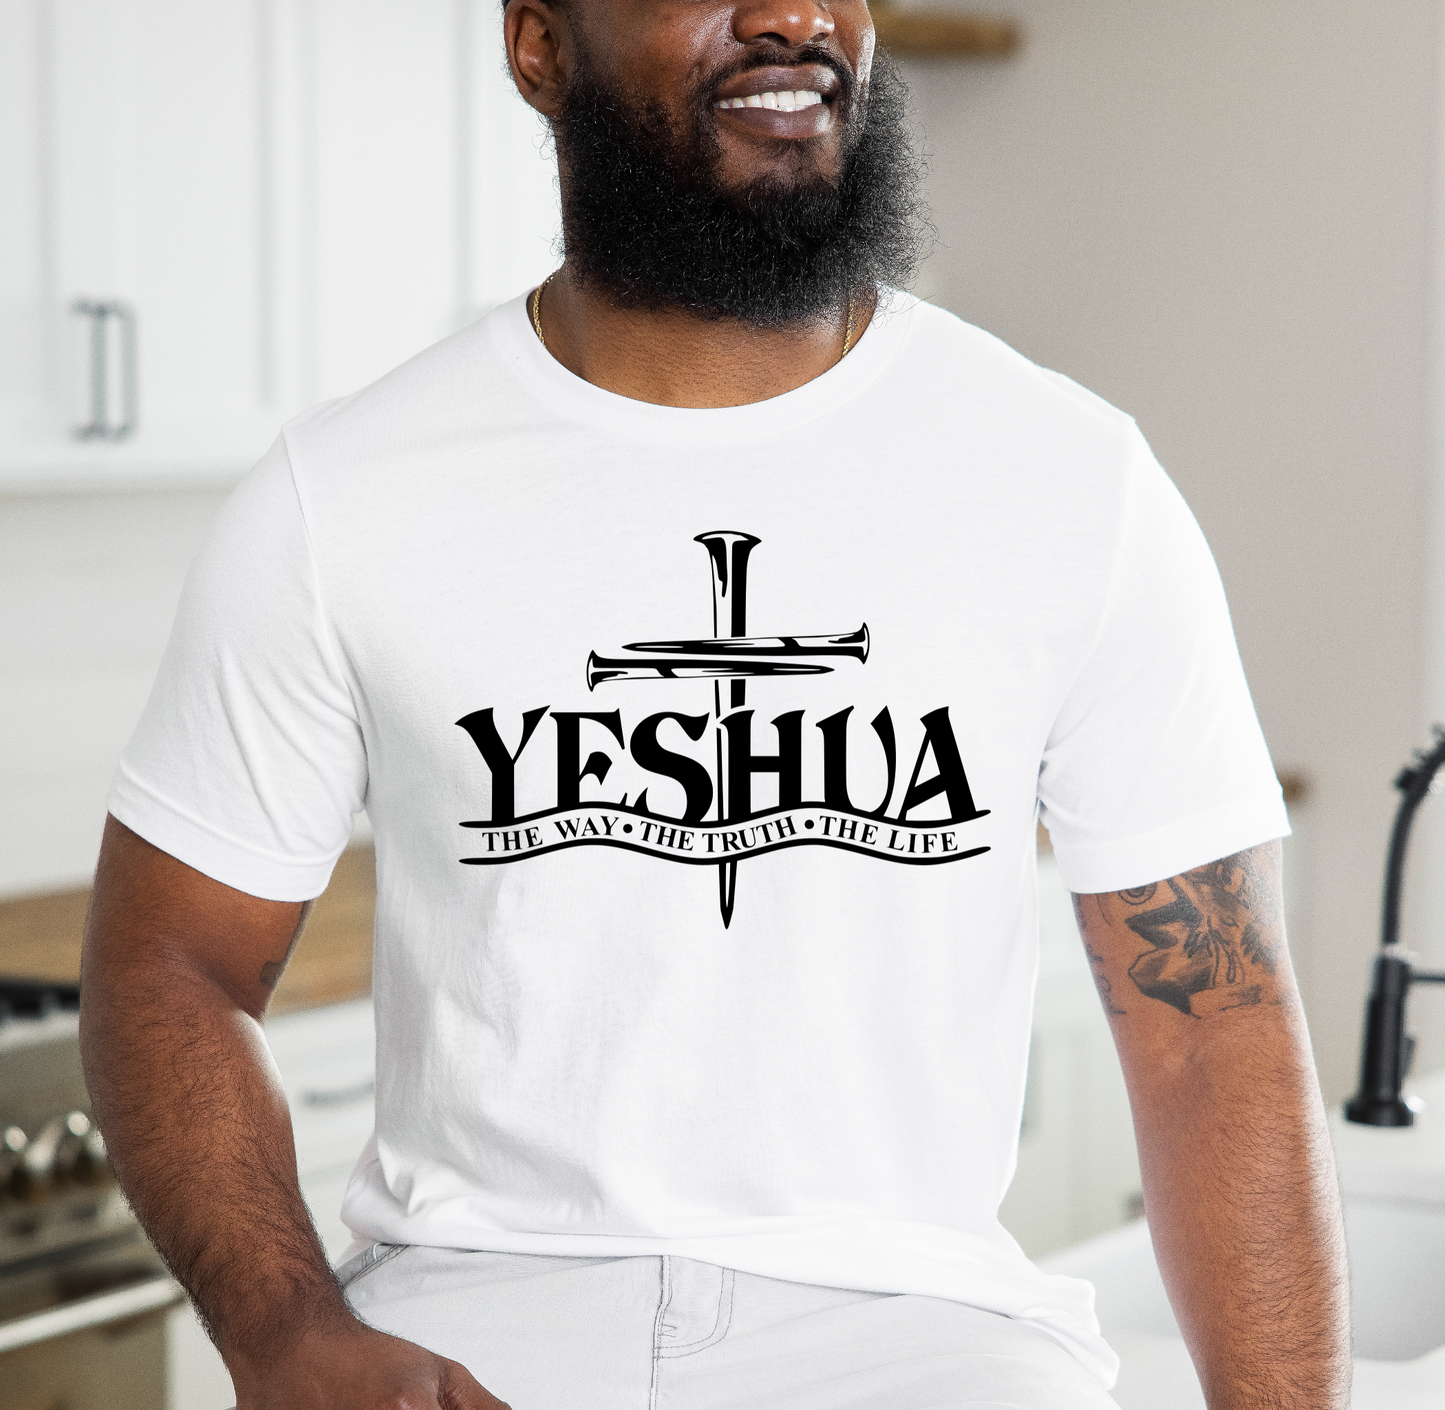 Yeshua the way the truth the life T-shirt